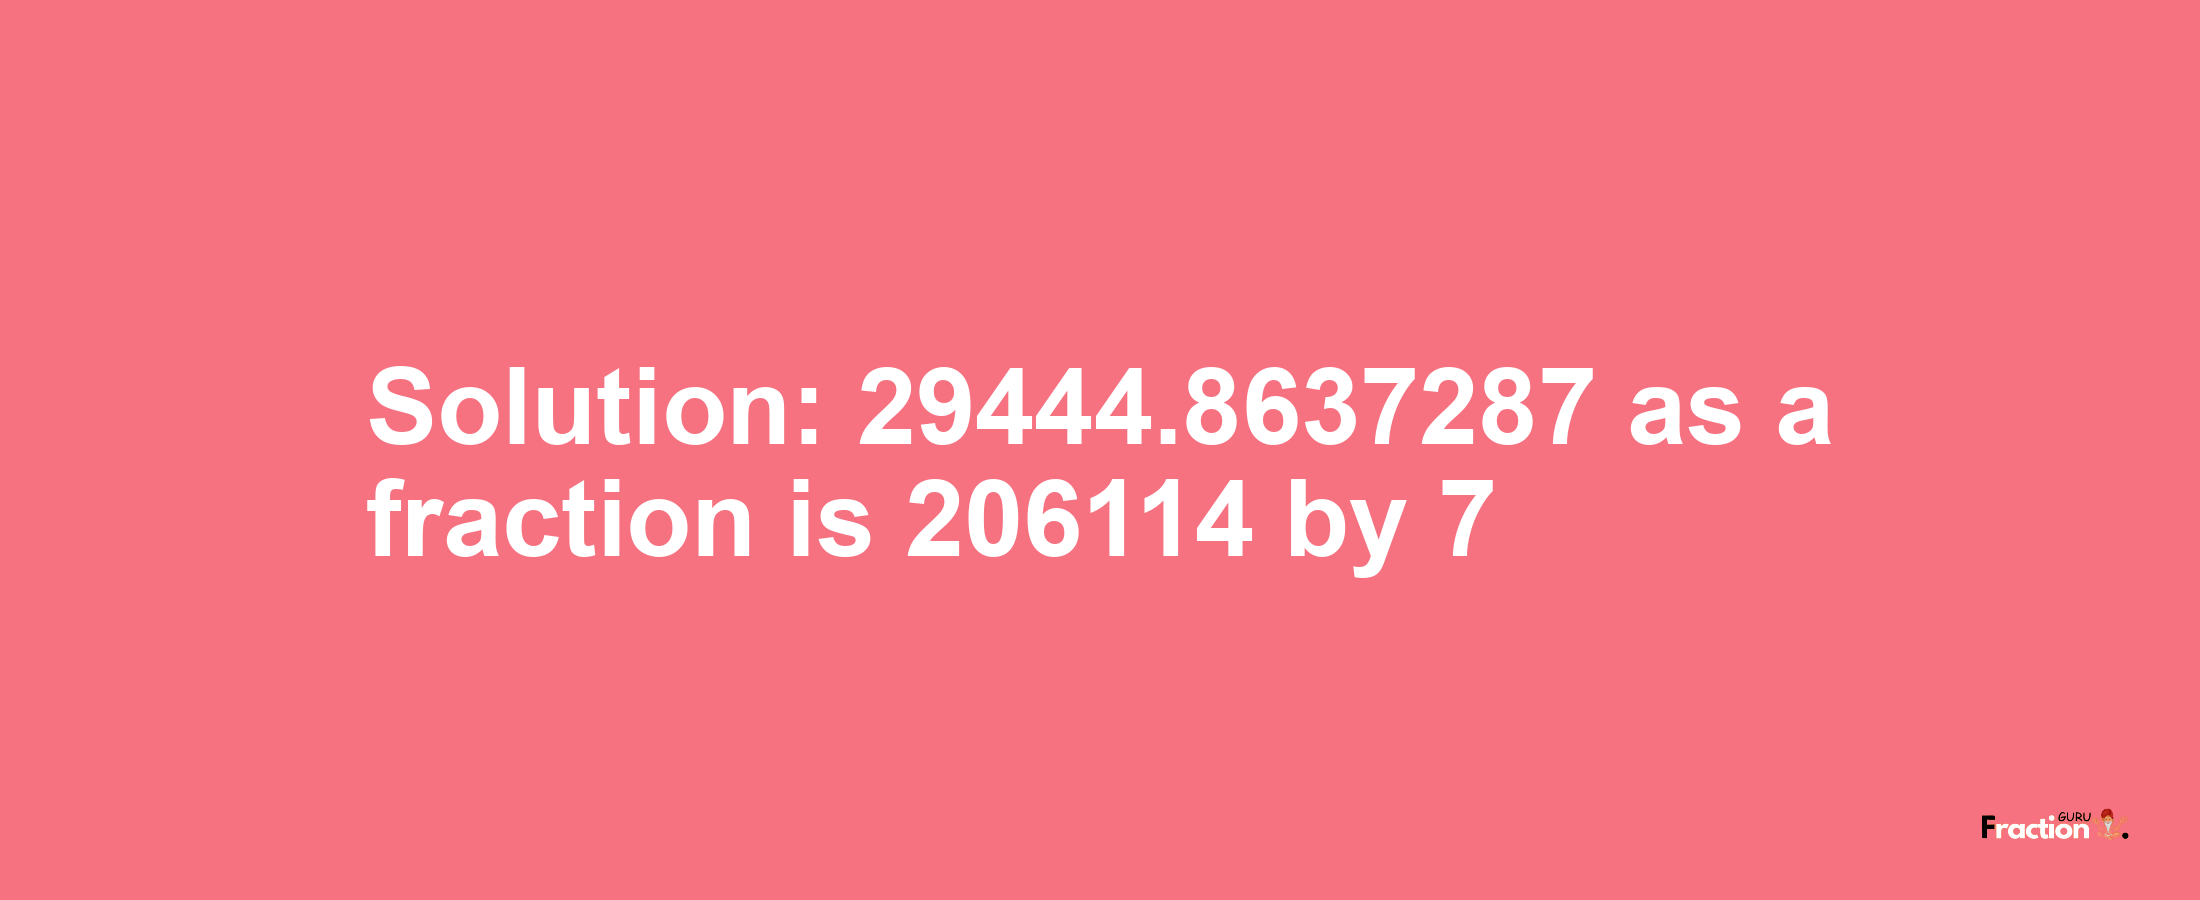 Solution:29444.8637287 as a fraction is 206114/7